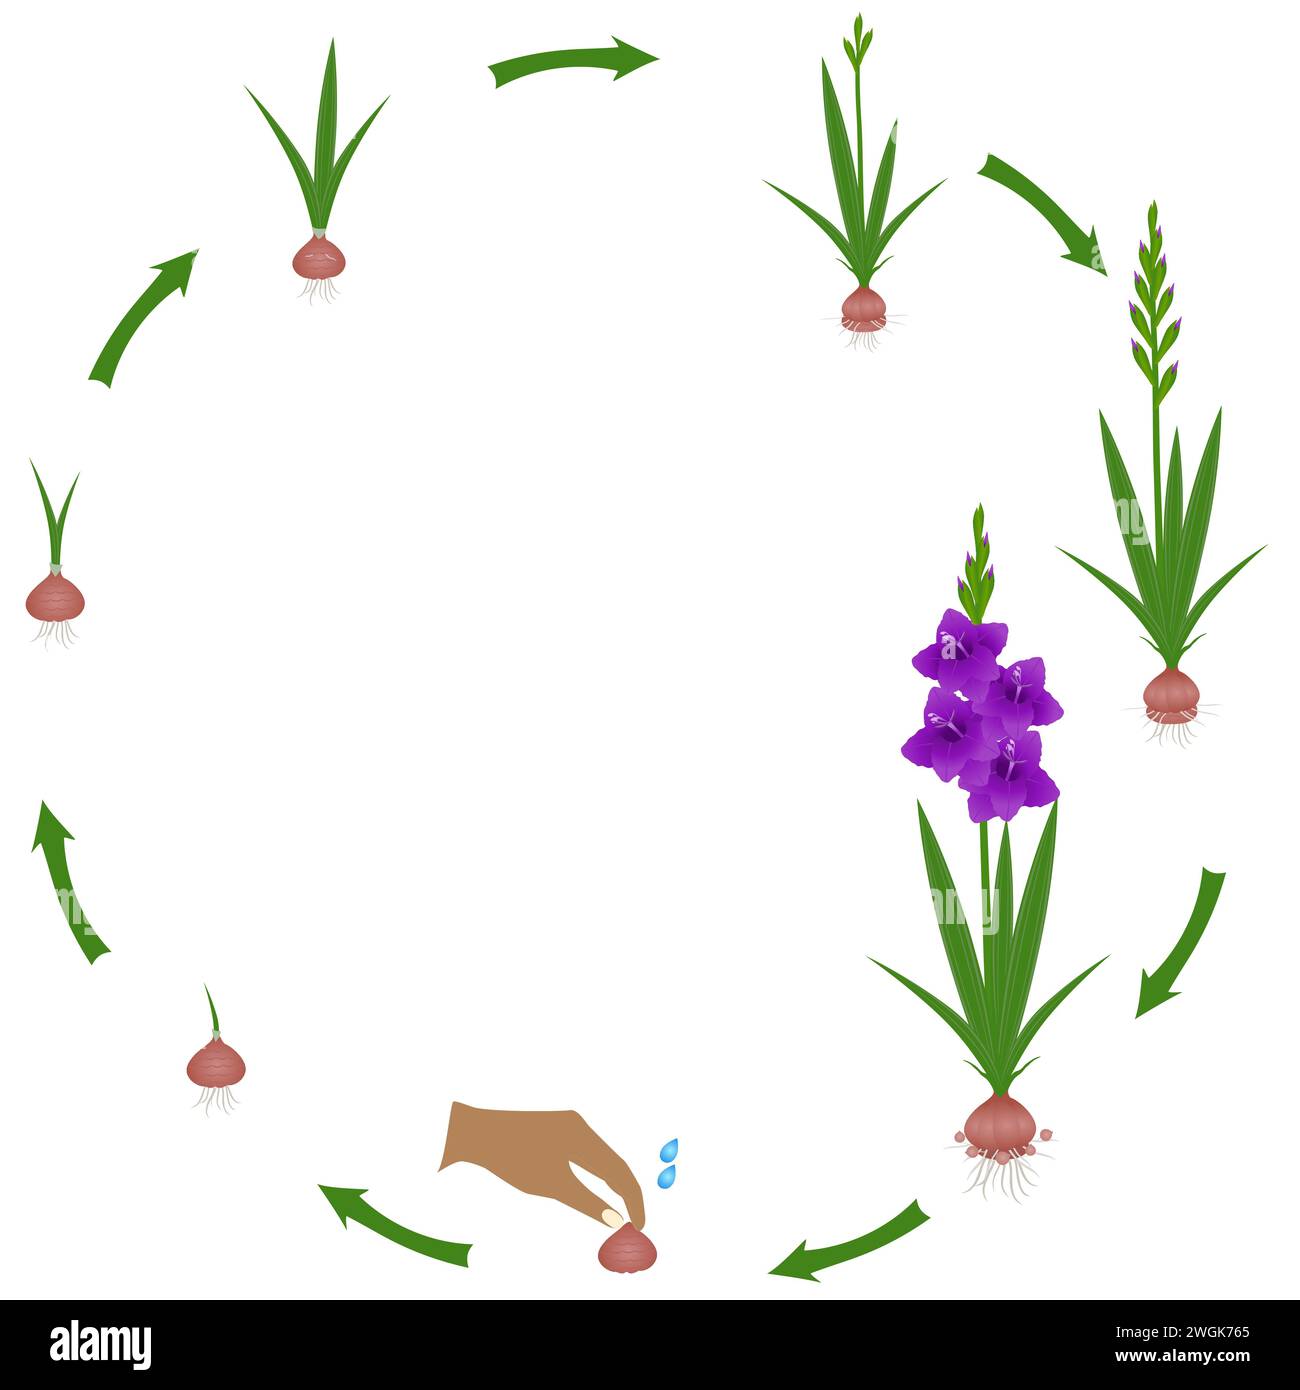 Life cycle of a gladiolus plant on a white background. Stock Vector